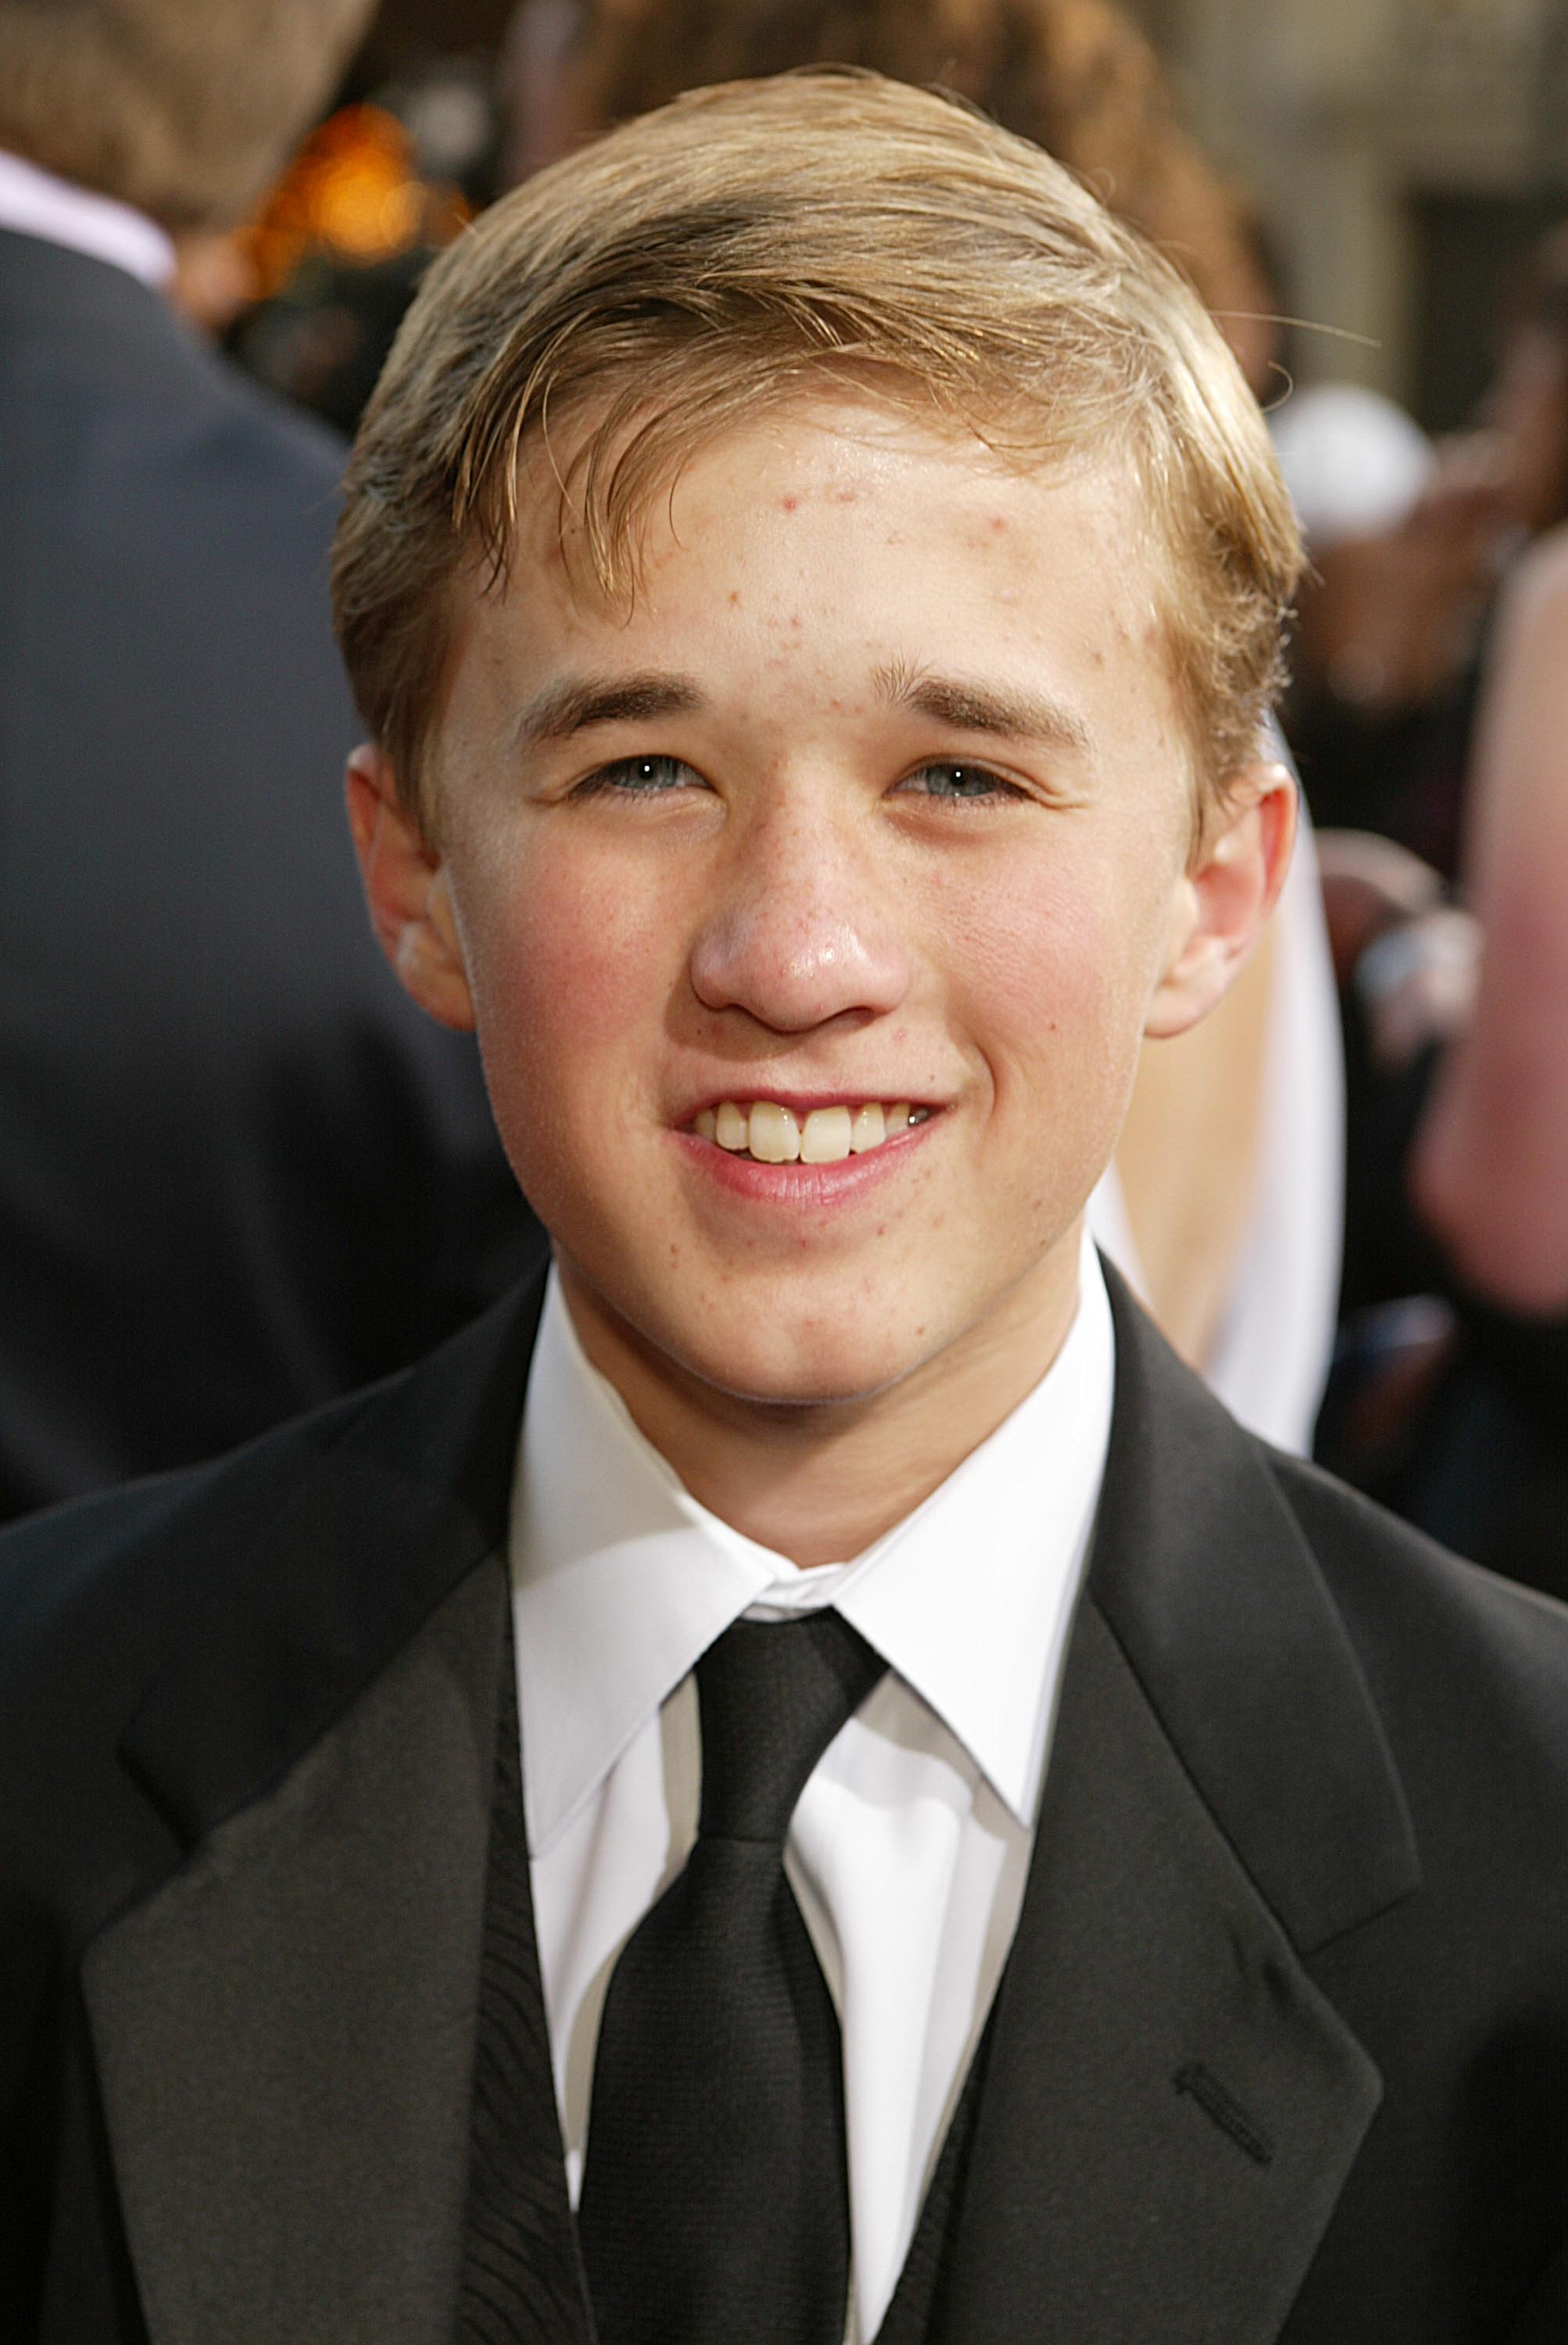 Haley Osment at the 30th AFI Life Achievement Award honoring Tom Hanks on June 12, 2002. | Source: Getty Images